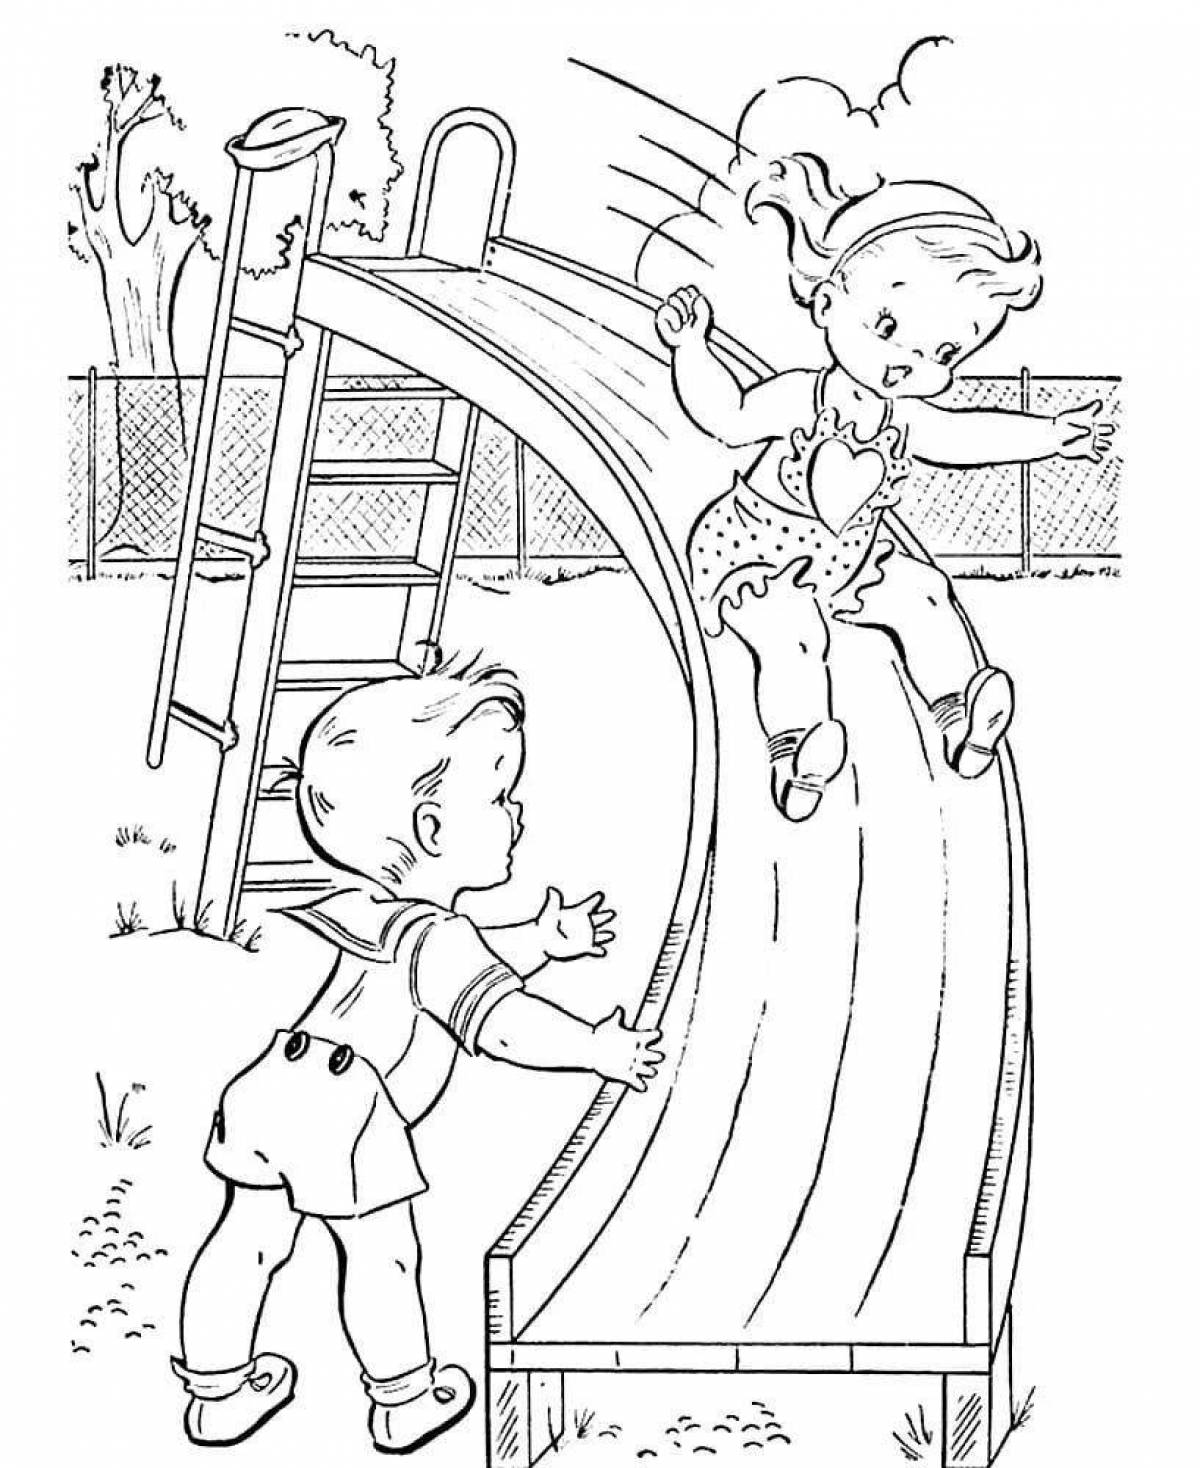 Colourful adventure coloring page area